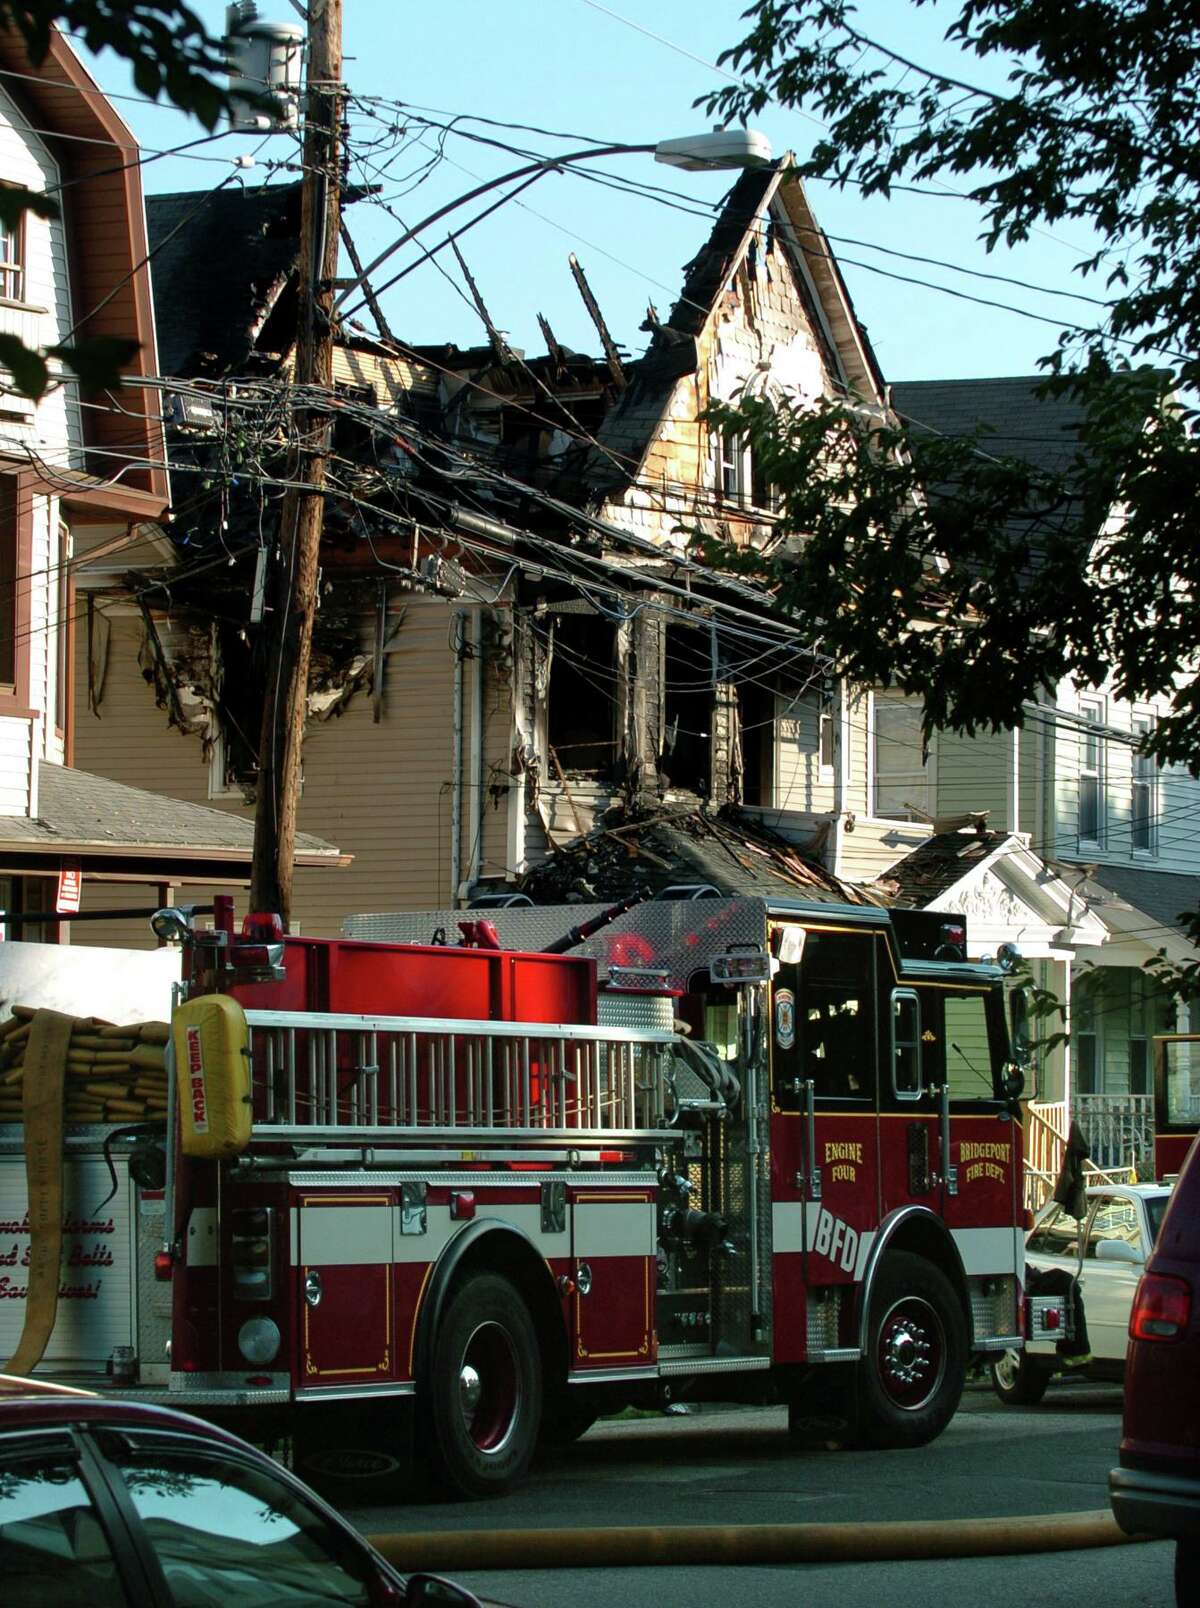 A file photo from Saturday, July 24, 2010 of 41 Elmwood Ave. after a fire in the structure claimed the lives of Lt. Steven Velasquez and Firefighter Michel Baik and injured three others.